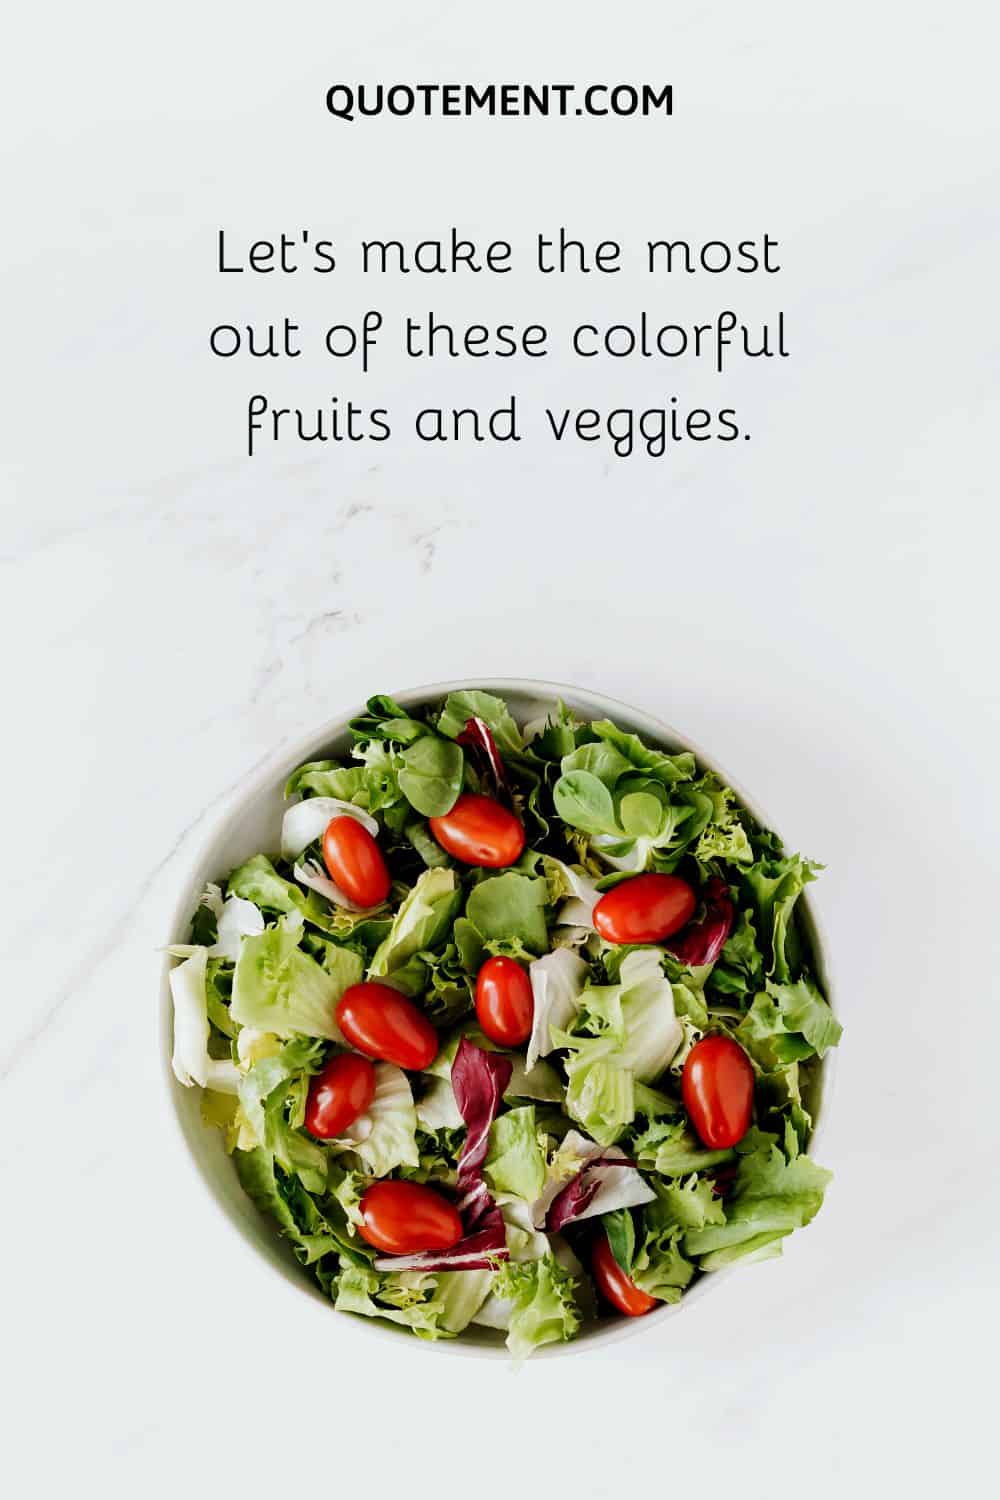 Let’s make the most out of these colorful fruits and veggies